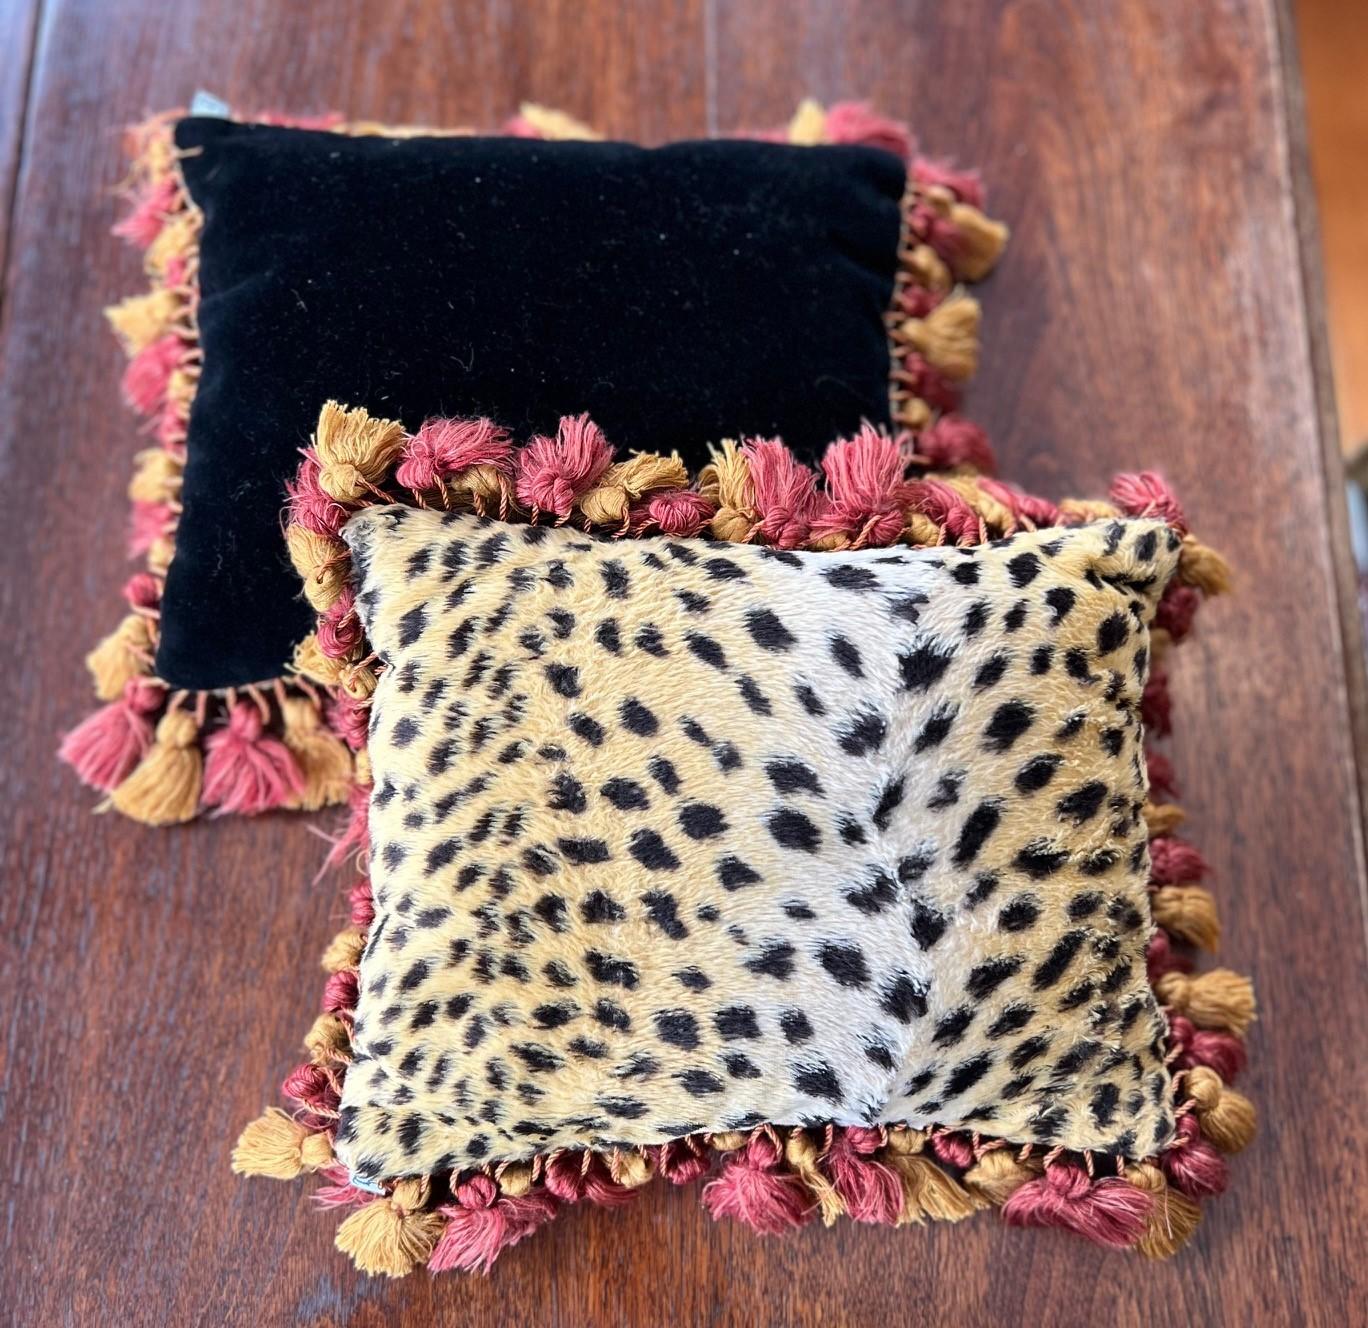 A pair of vintage faux fur cheetah and black velvet boudoir pillows with tassel trim. A fun pair of well made accent pillows.

Dimensions:
11.25